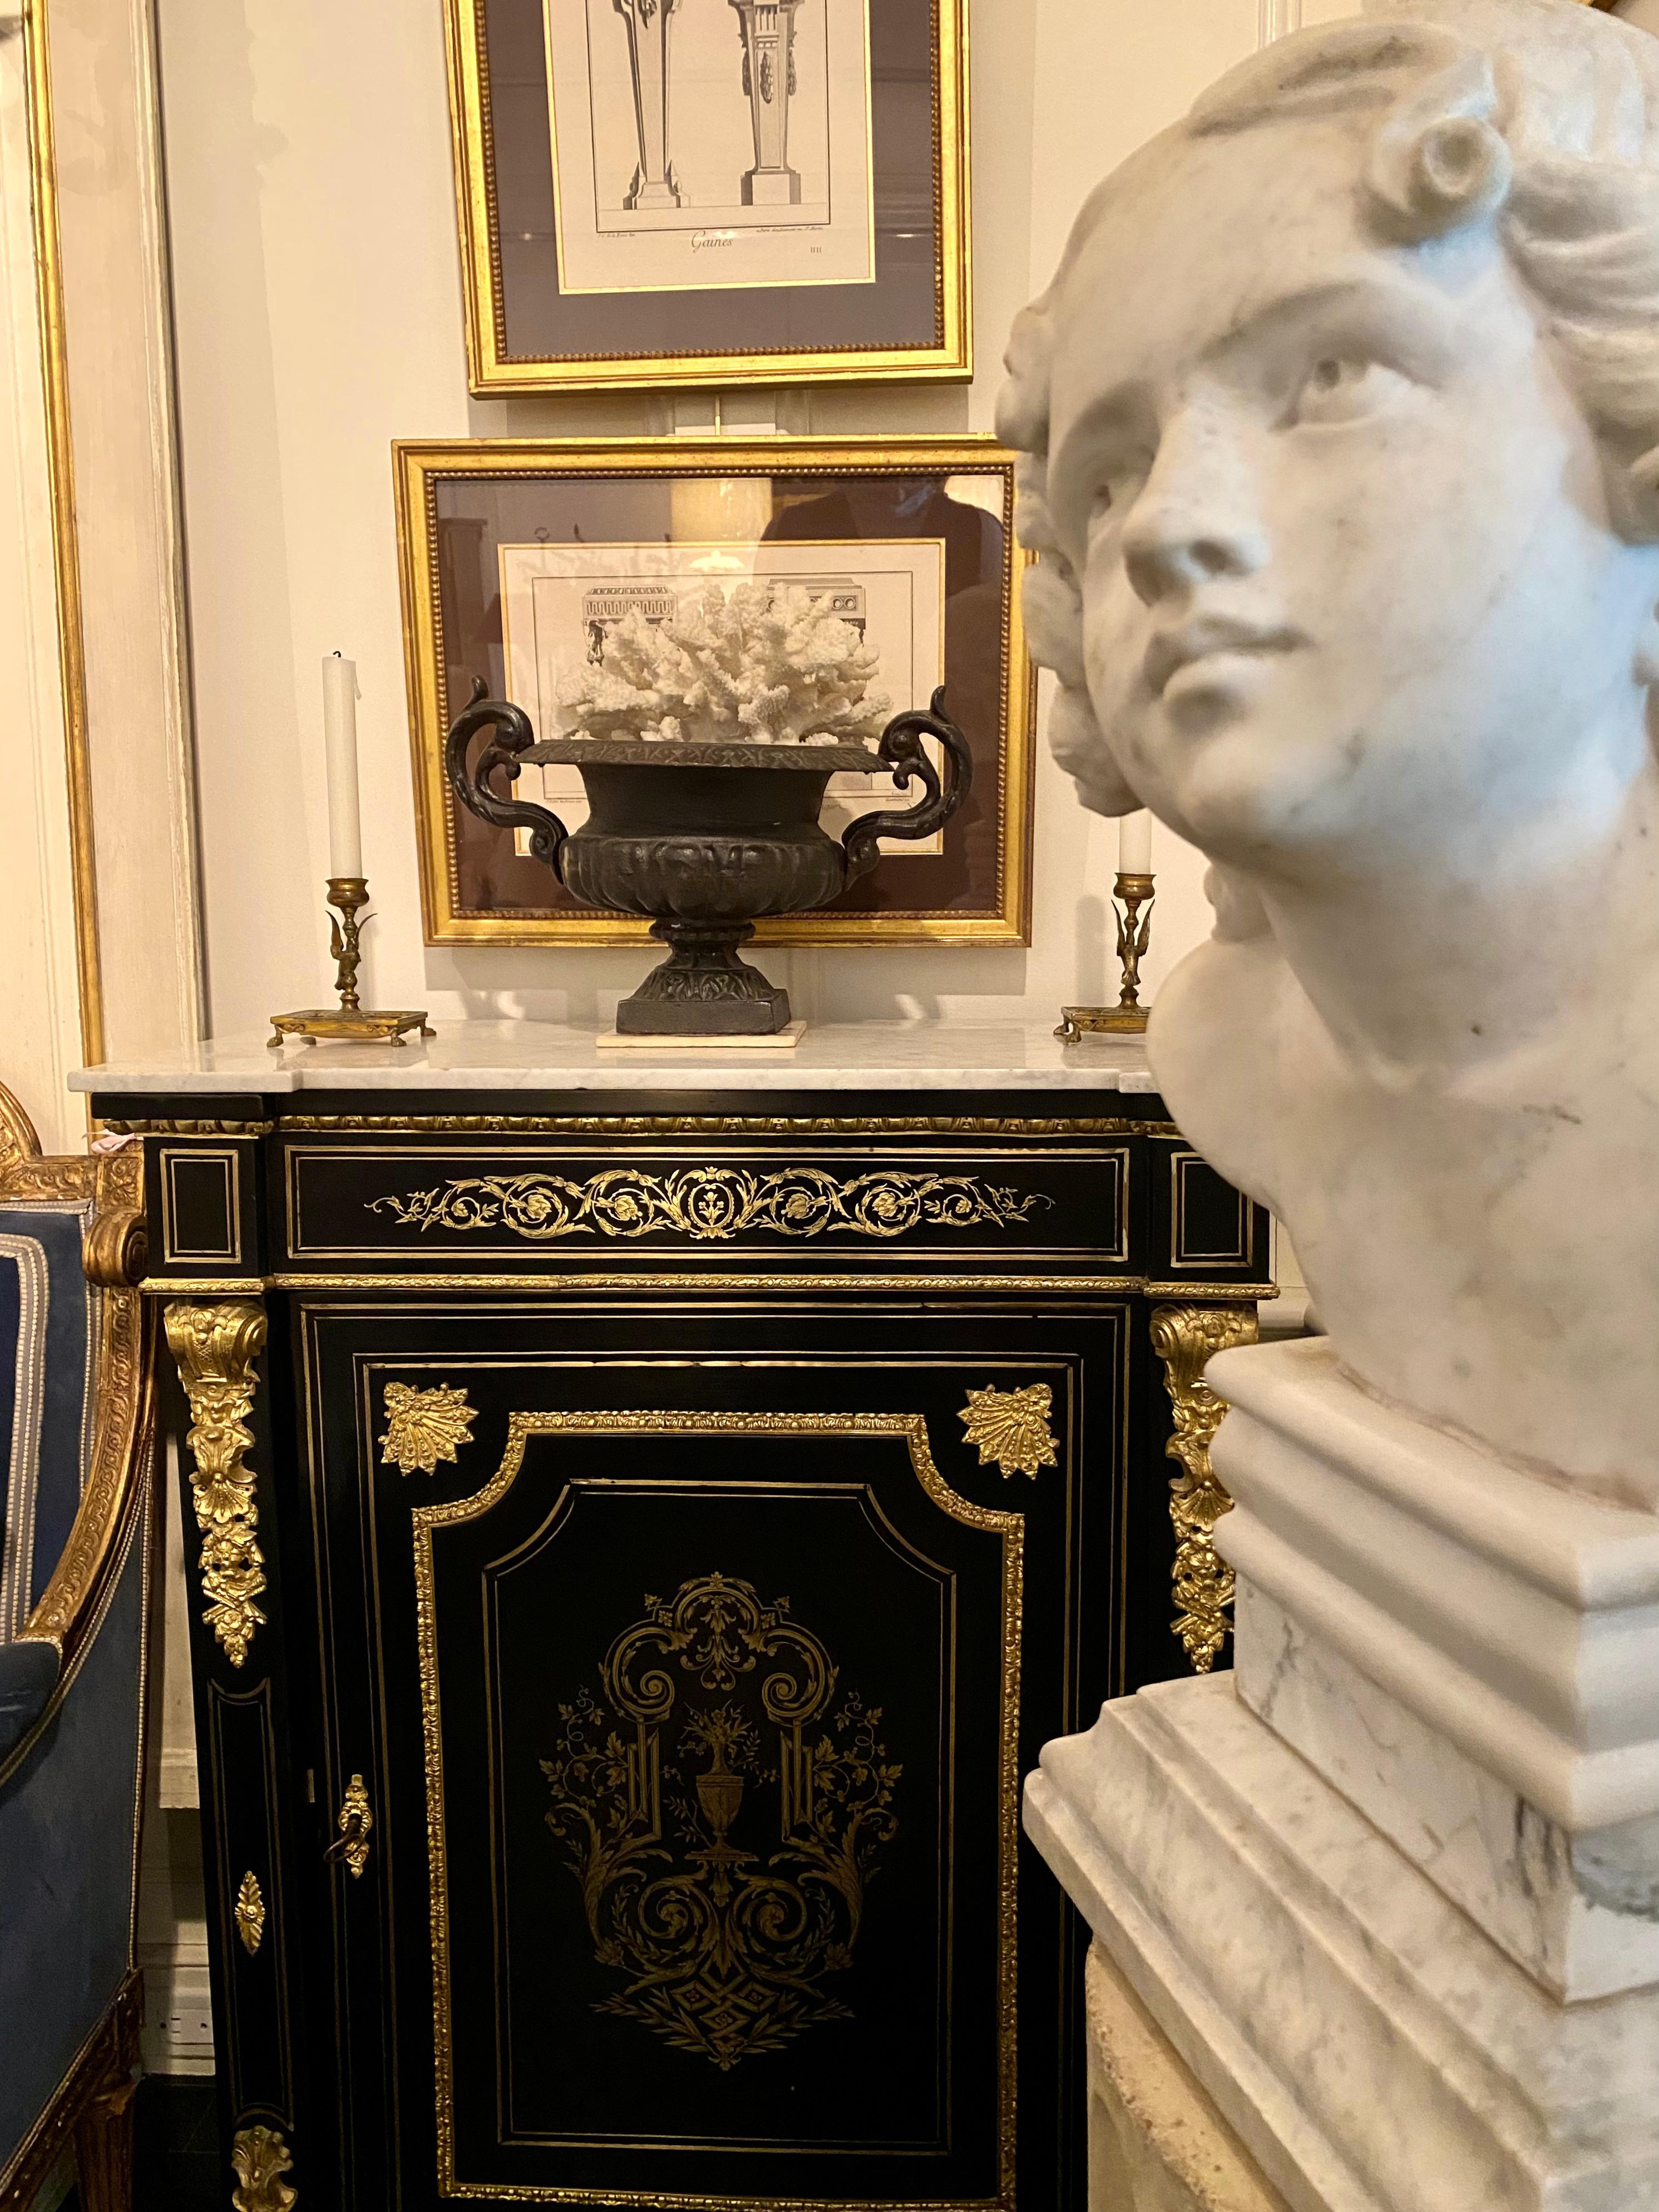 Napoleon III cabinet or Petite armoire, French 19th century

Ebonized, Boulle Style details, bronze inlay, gilt bronze mounts, marble top. Its neoclassical lines and ebonized gloss give it a Hollywood Regency chic.